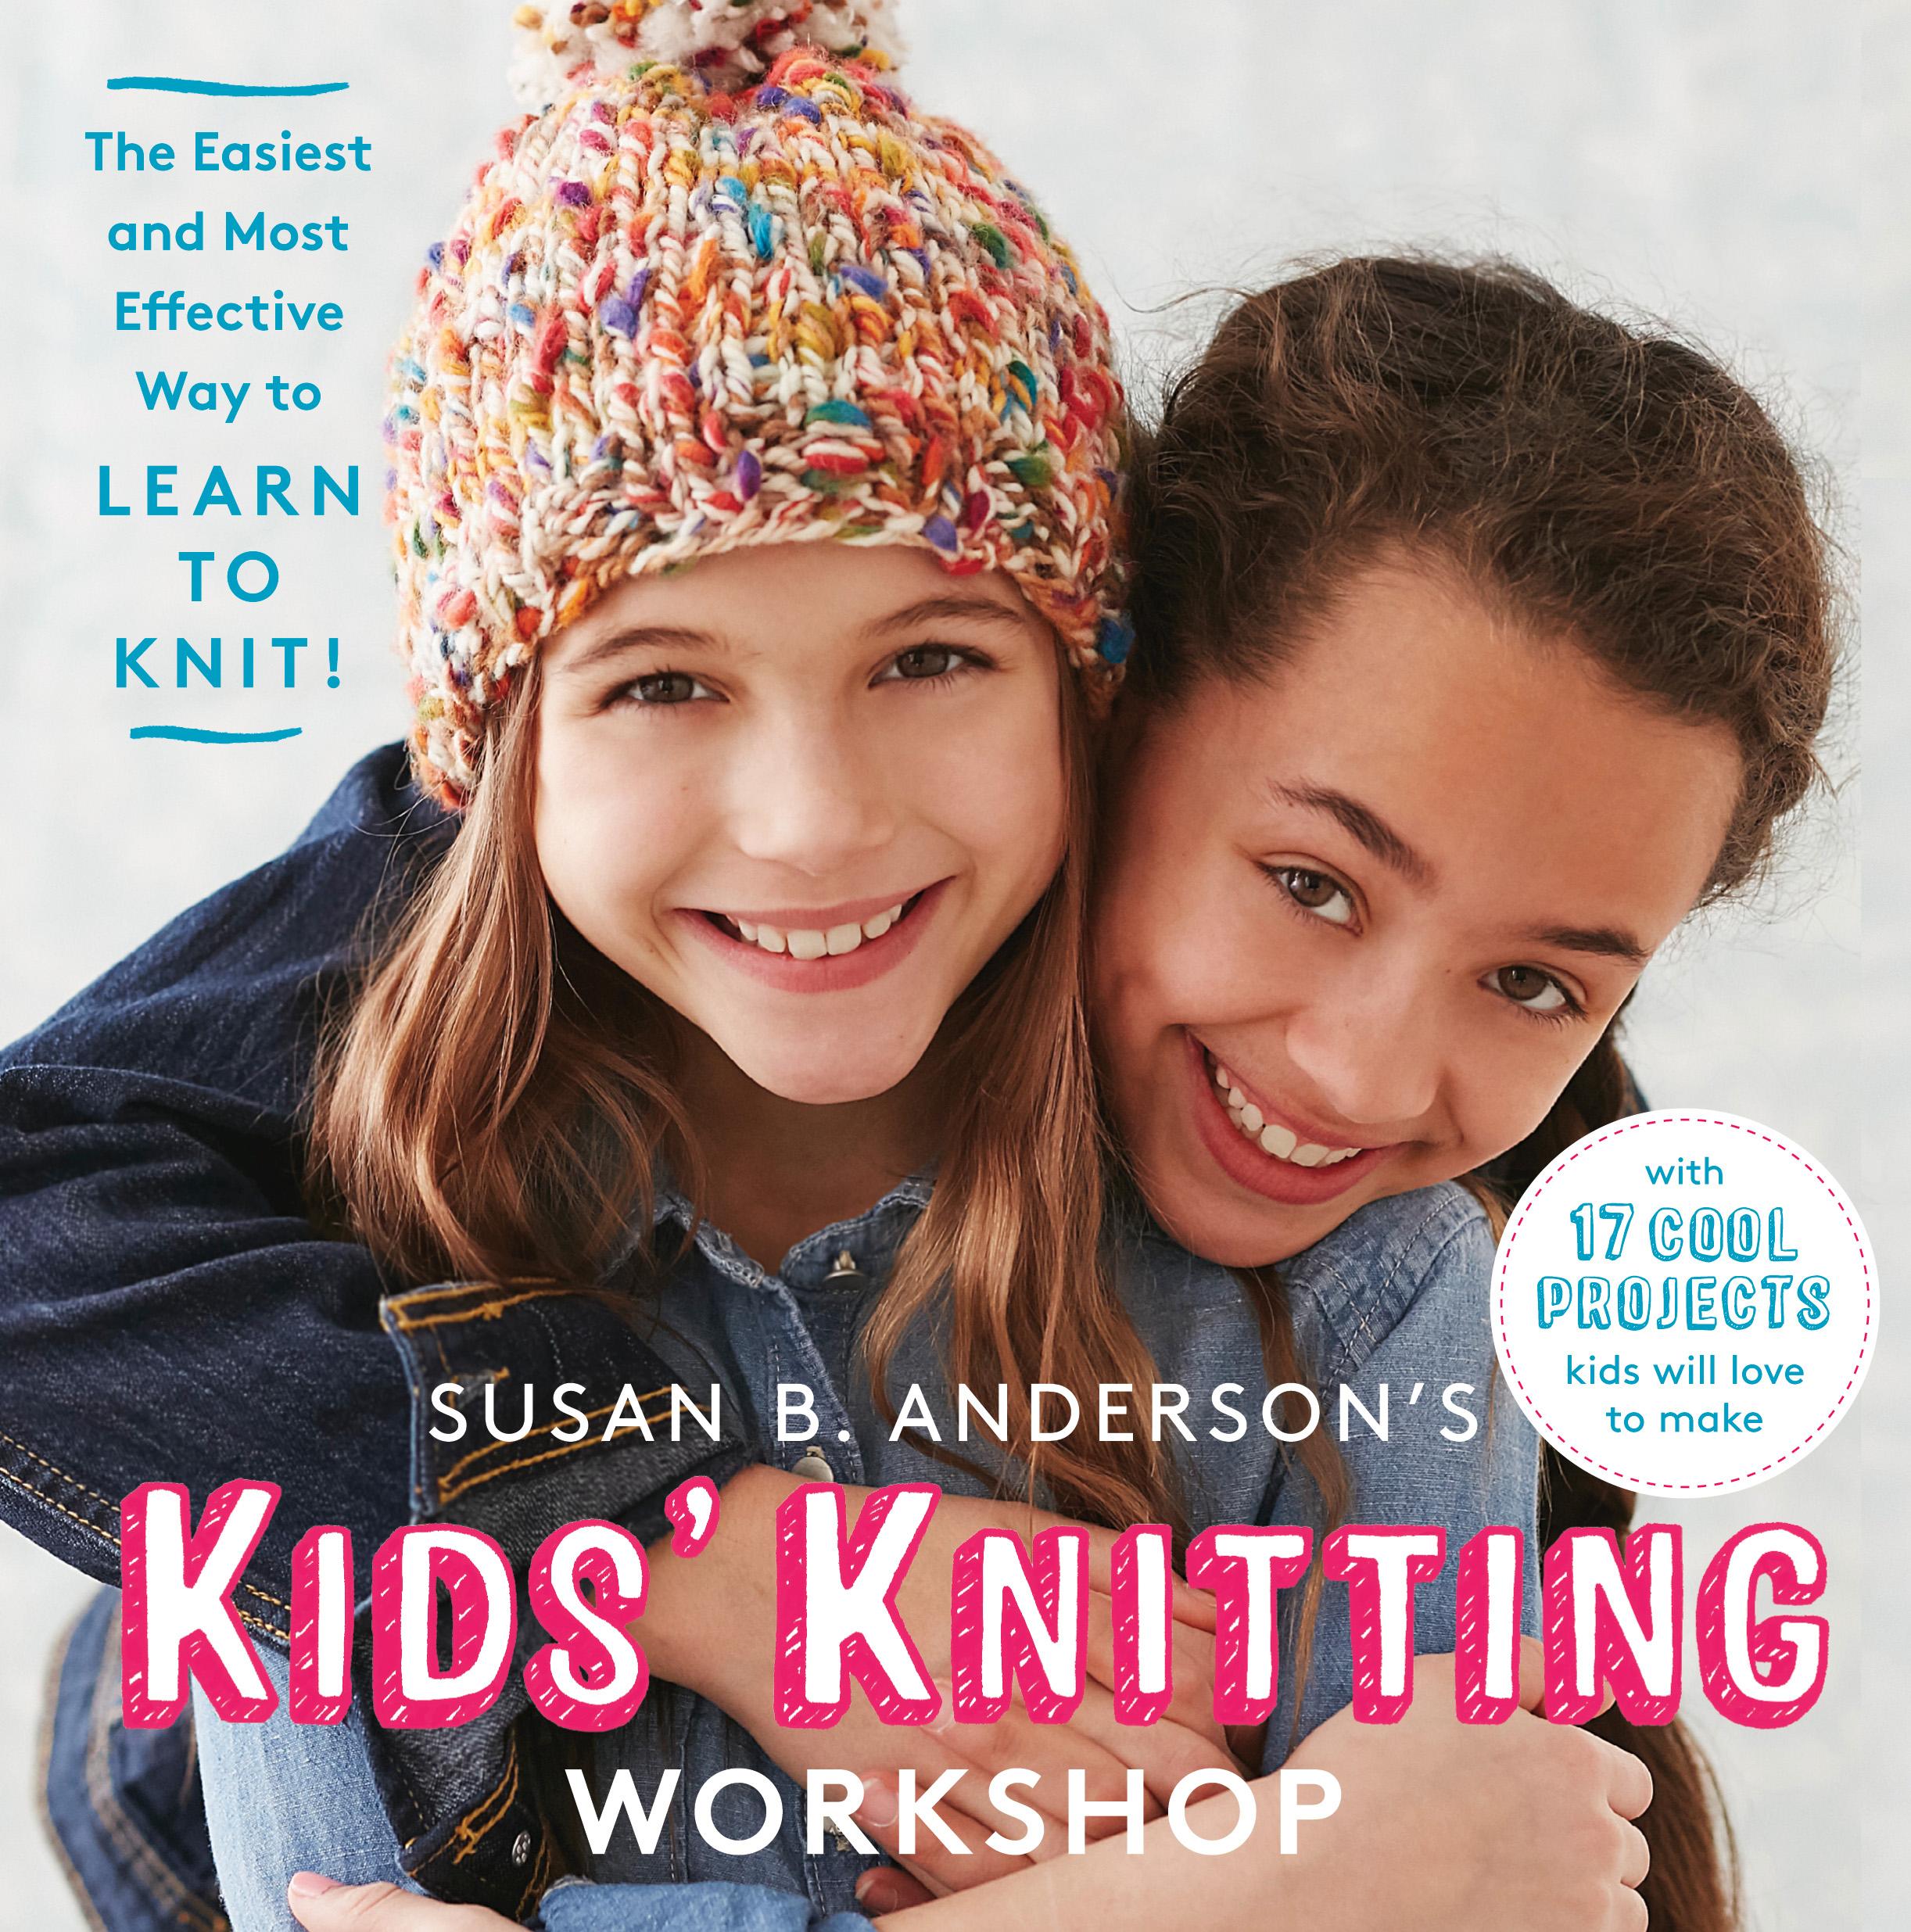 Excerpted from Susan B. Anderson’s Kids’ Knitting Workshop by Susan B. Anderson (Artisan Books). Copyright © 2015. Photographs by Lauren Volo. Illustrations by Alison Kolesar.